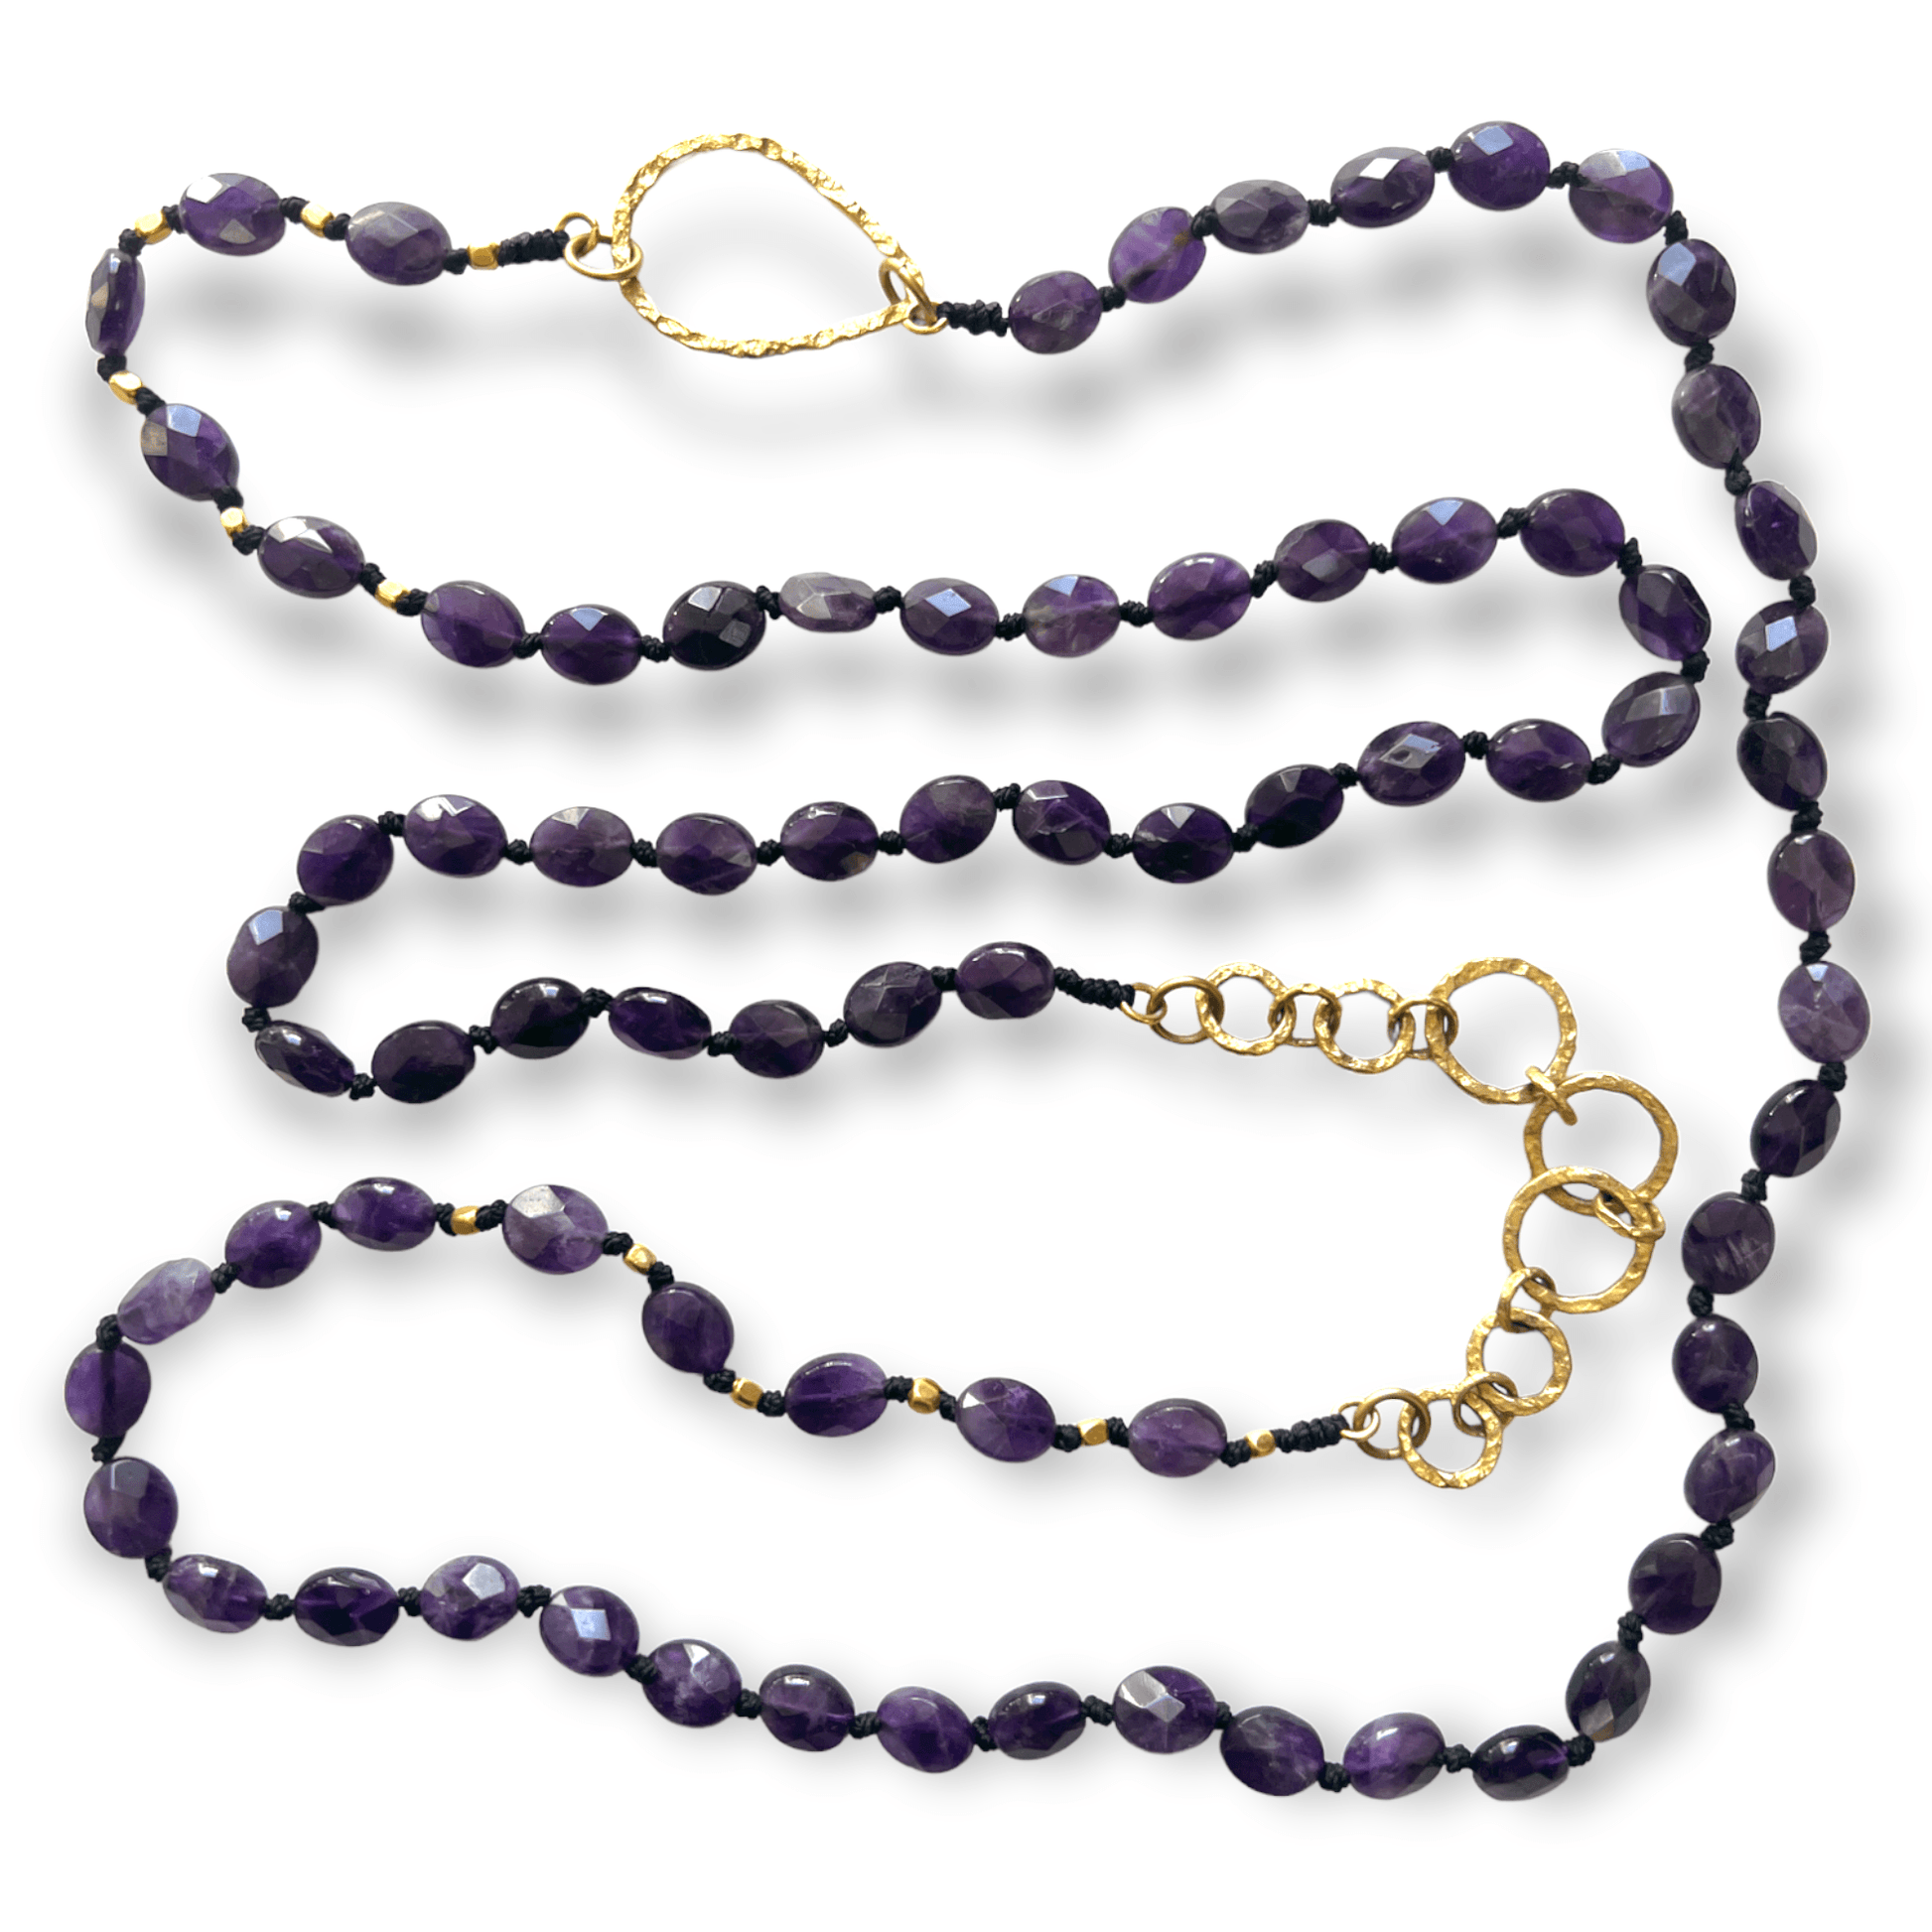 Faceted oval amethyst beaded statement necklace with brass ring accentSundara Joon